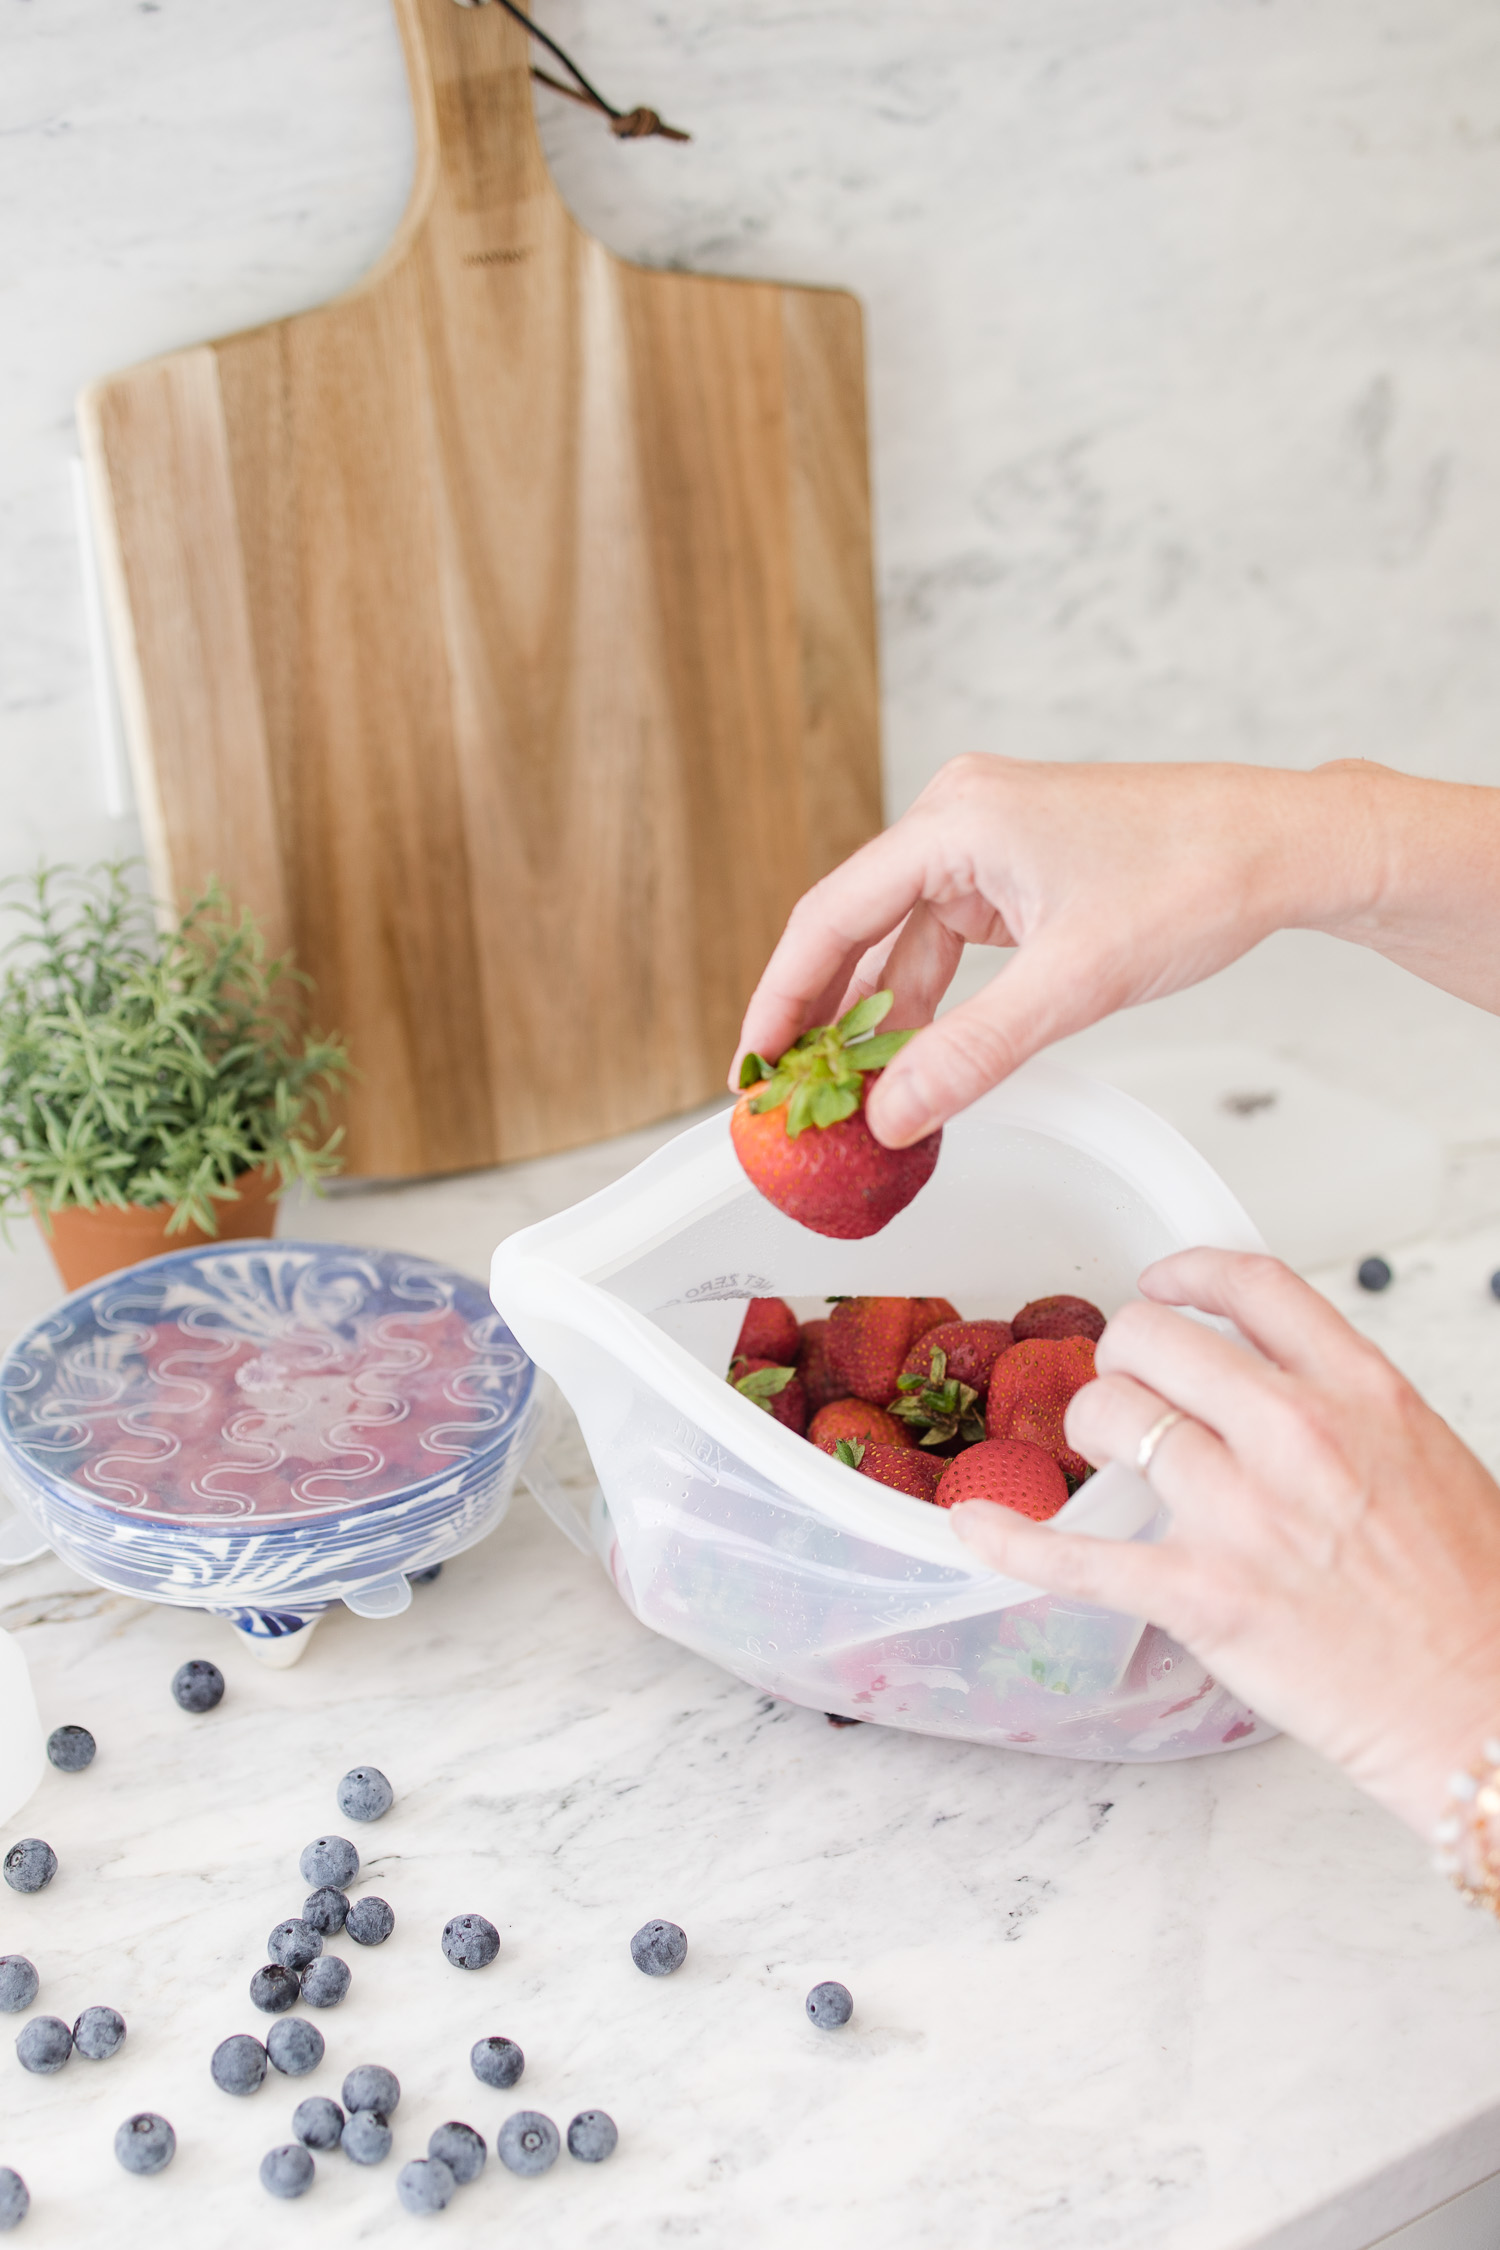 silicone bag with strawberries for waste free living in kitchen